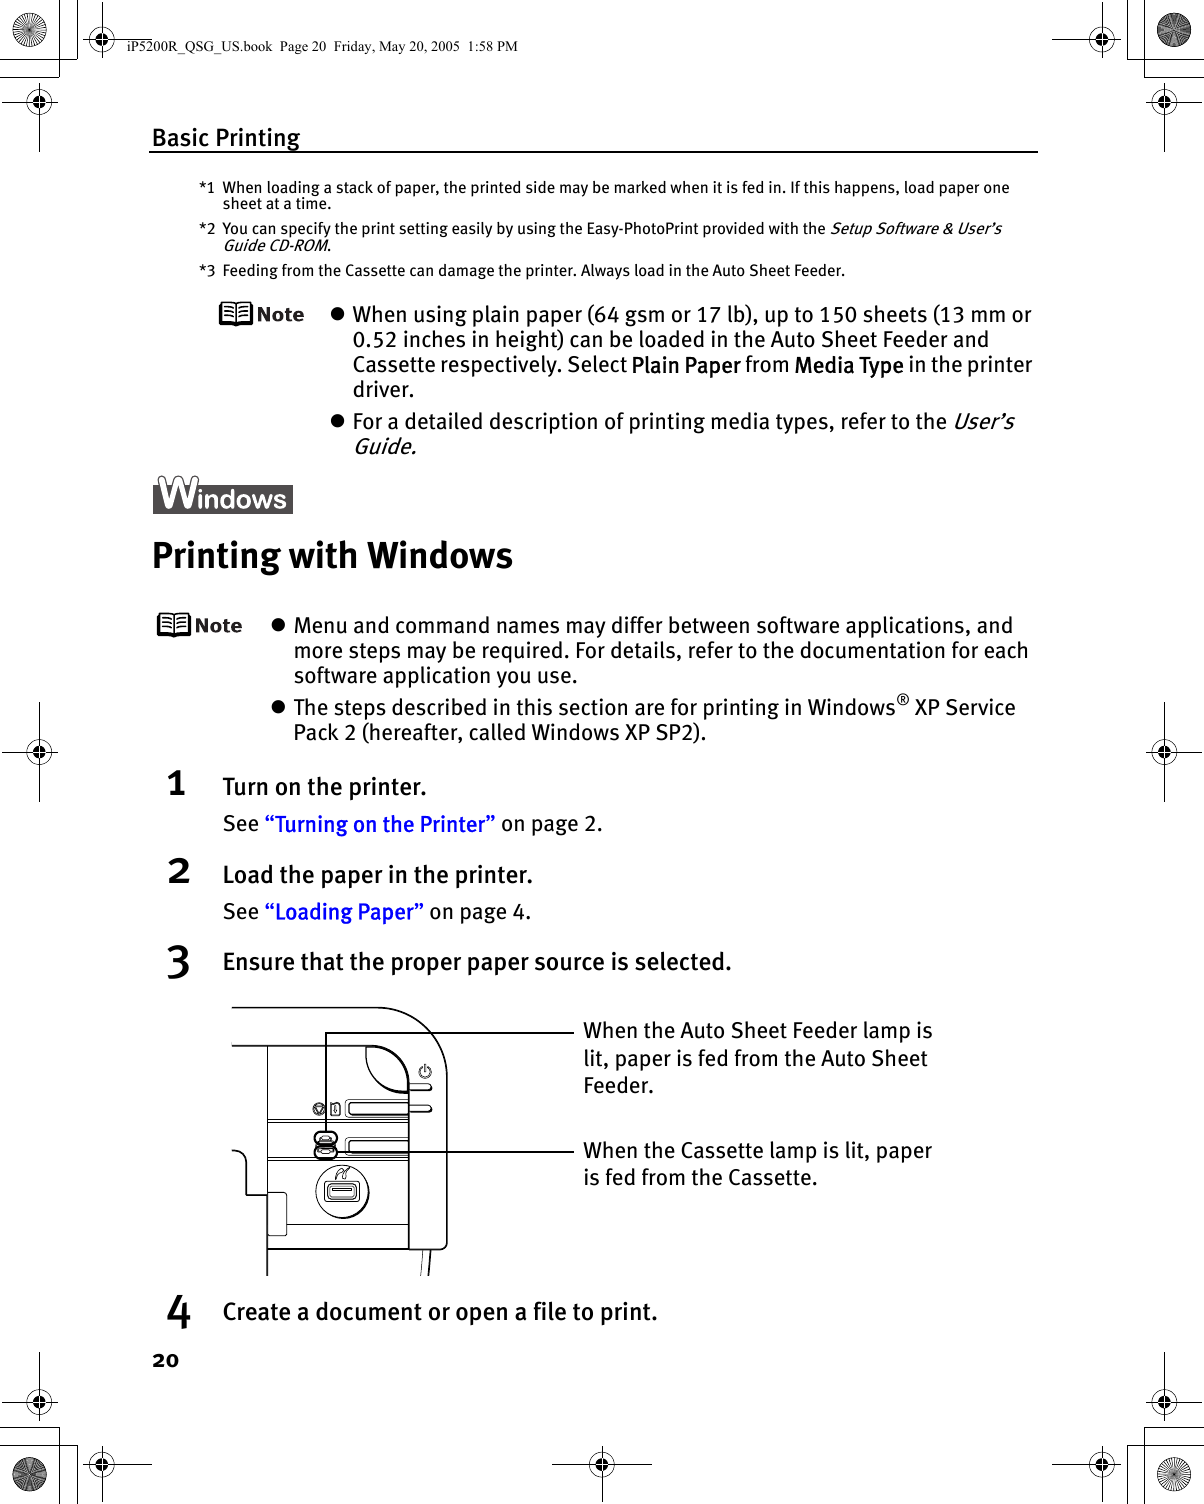 Basic Printing20*1 When loading a stack of paper, the printed side may be marked when it is fed in. If this happens, load paper one sheet at a time.*2 You can specify the print setting easily by using the Easy-PhotoPrint provided with the Setup Software &amp; User’s Guide CD-ROM.*3 Feeding from the Cassette can damage the printer. Always load in the Auto Sheet Feeder.zWhen using plain paper (64 gsm or 17 lb), up to 150 sheets (13 mm or 0.52 inches in height) can be loaded in the Auto Sheet Feeder and Cassette respectively. Select Plain Paper from Media Type in the printer driver.zFor a detailed description of printing media types, refer to the User’s Guide.Printing with WindowszMenu and command names may differ between software applications, and more steps may be required. For details, refer to the documentation for each software application you use.zThe steps described in this section are for printing in Windows® XP Service Pack 2 (hereafter, called Windows XP SP2).1Turn on the printer.See “Turning on the Printer” on page 2.2Load the paper in the printer.See “Loading Paper” on page 4.3Ensure that the proper paper source is selected.4Create a document or open a file to print.When the Cassette lamp is lit, paper is fed from the Cassette.When the Auto Sheet Feeder lamp is lit, paper is fed from the Auto Sheet Feeder.iP5200R_QSG_US.book  Page 20  Friday, May 20, 2005  1:58 PM